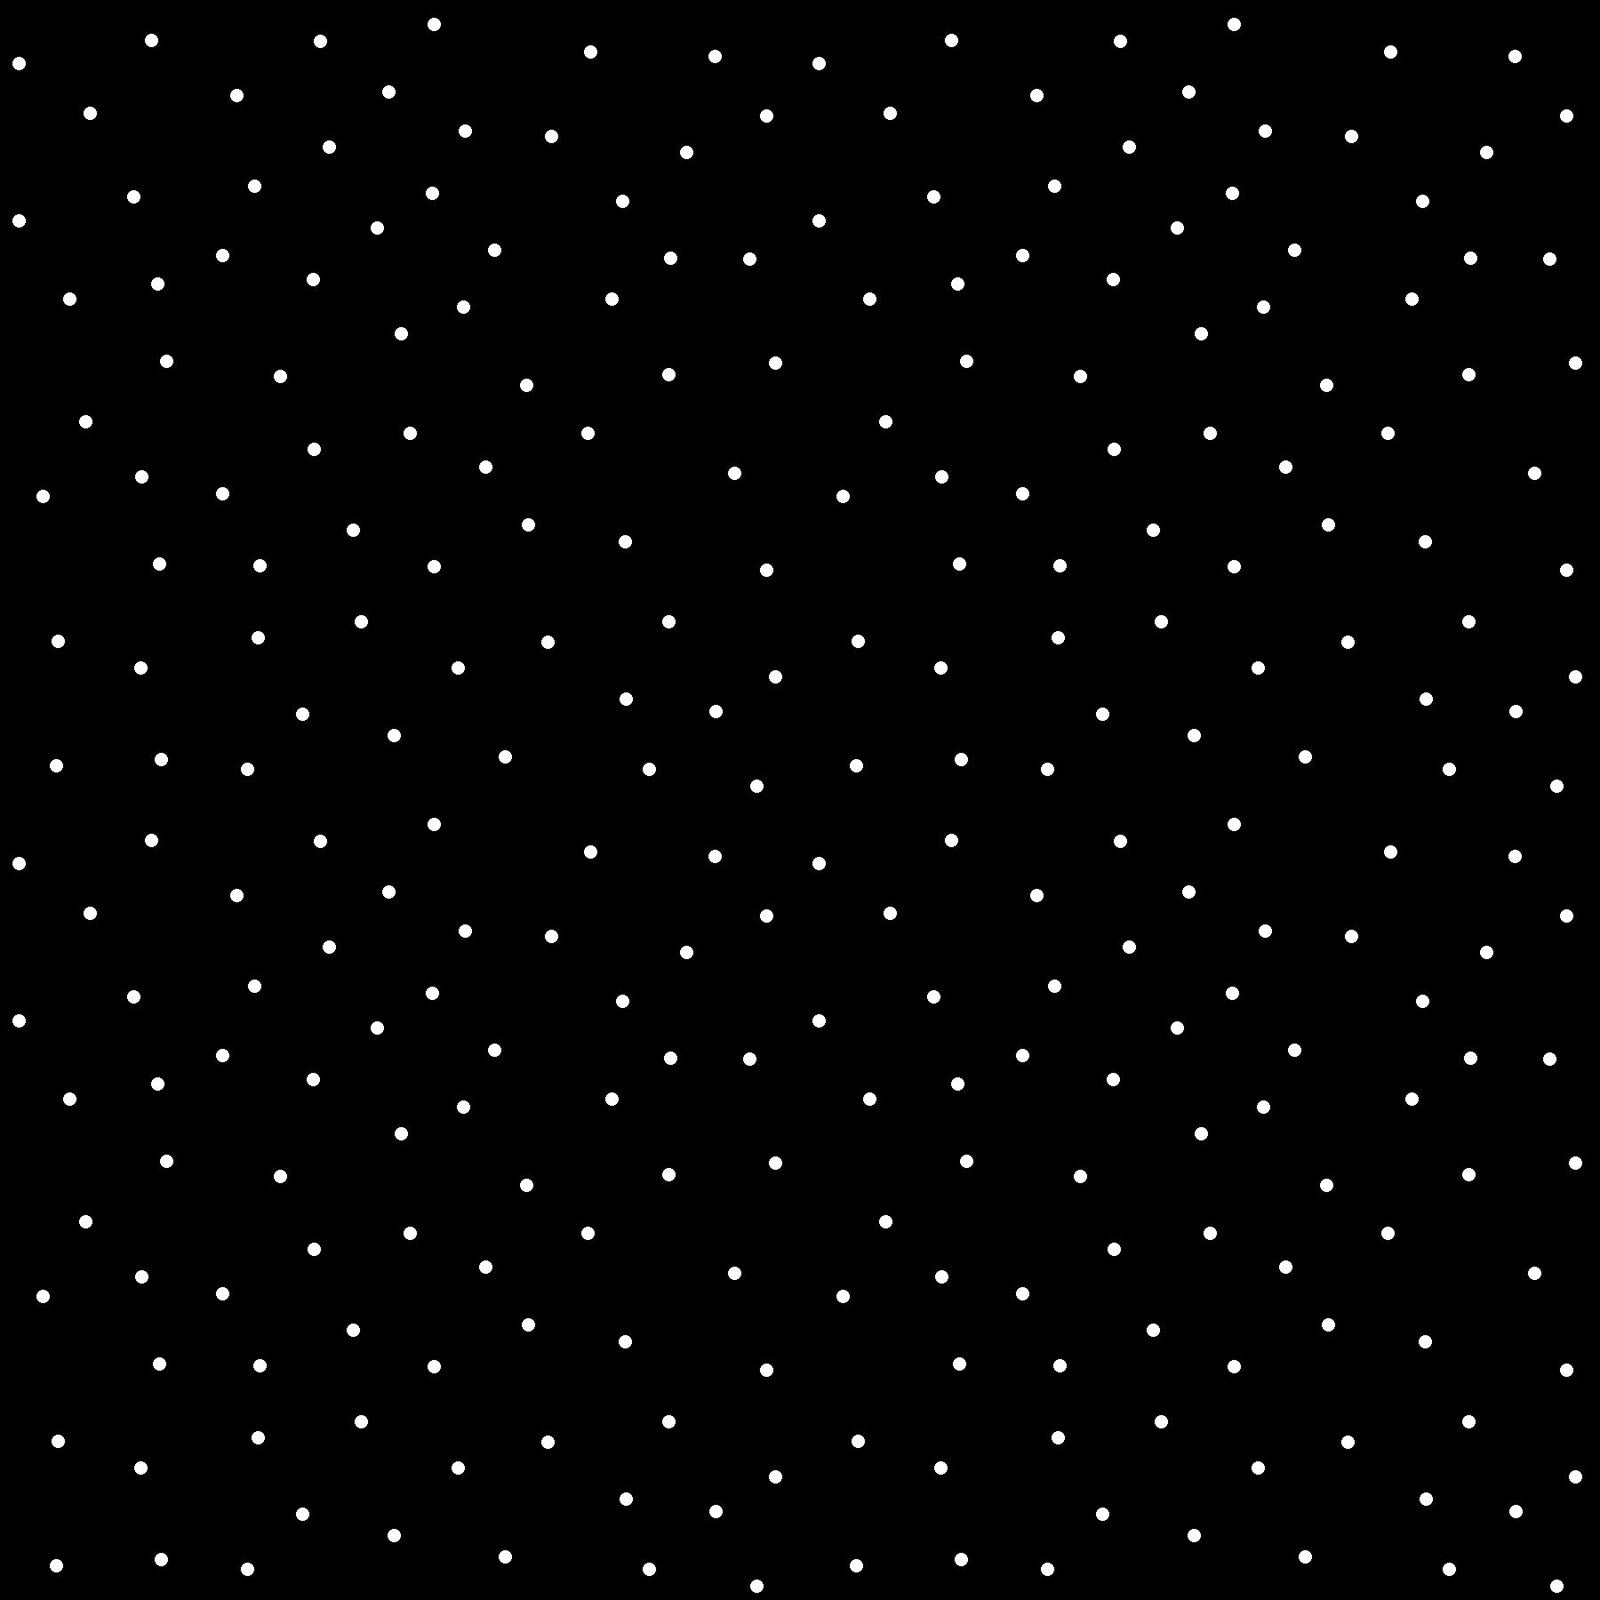 Tiny Dots is part of the Kimberbell Basics line designed by Kim Christopherson for Maywood Studio. This fabric features tiny white dots on a black background in a random pattern. It is perfect as a background for adding a little bit of color without detracting from any object appliqued, embroidered, or pieced along with it.